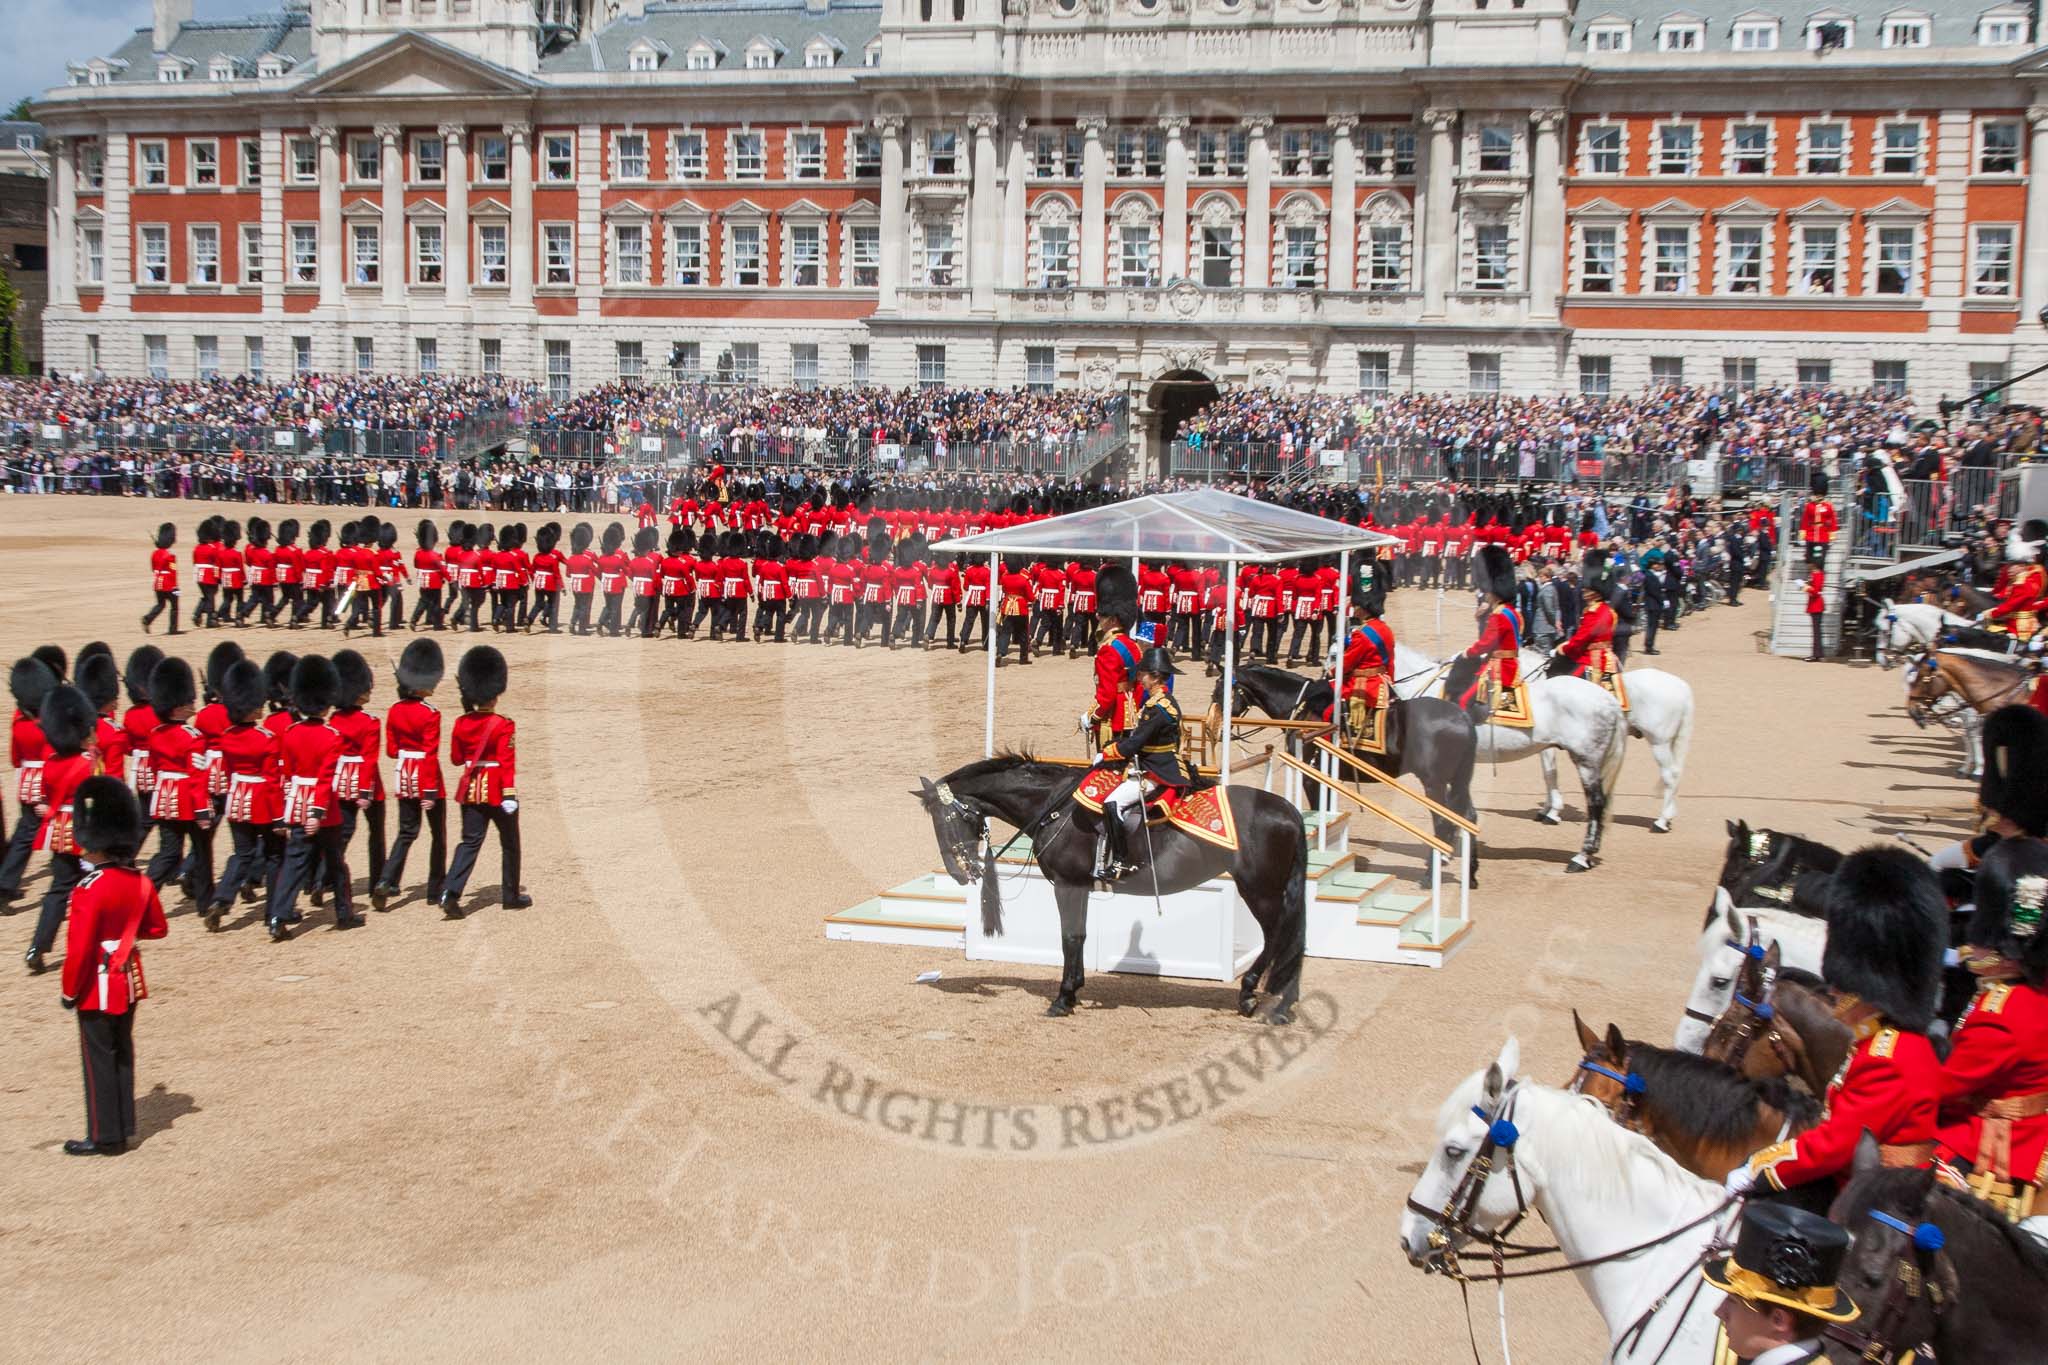 Trooping the Colour 2013: The Royal Colonels, and HRH The Duke of Kent and HM The Queen are standing on the dais, during the March Past. Image #609, 15 June 2013 11:46 Horse Guards Parade, London, UK